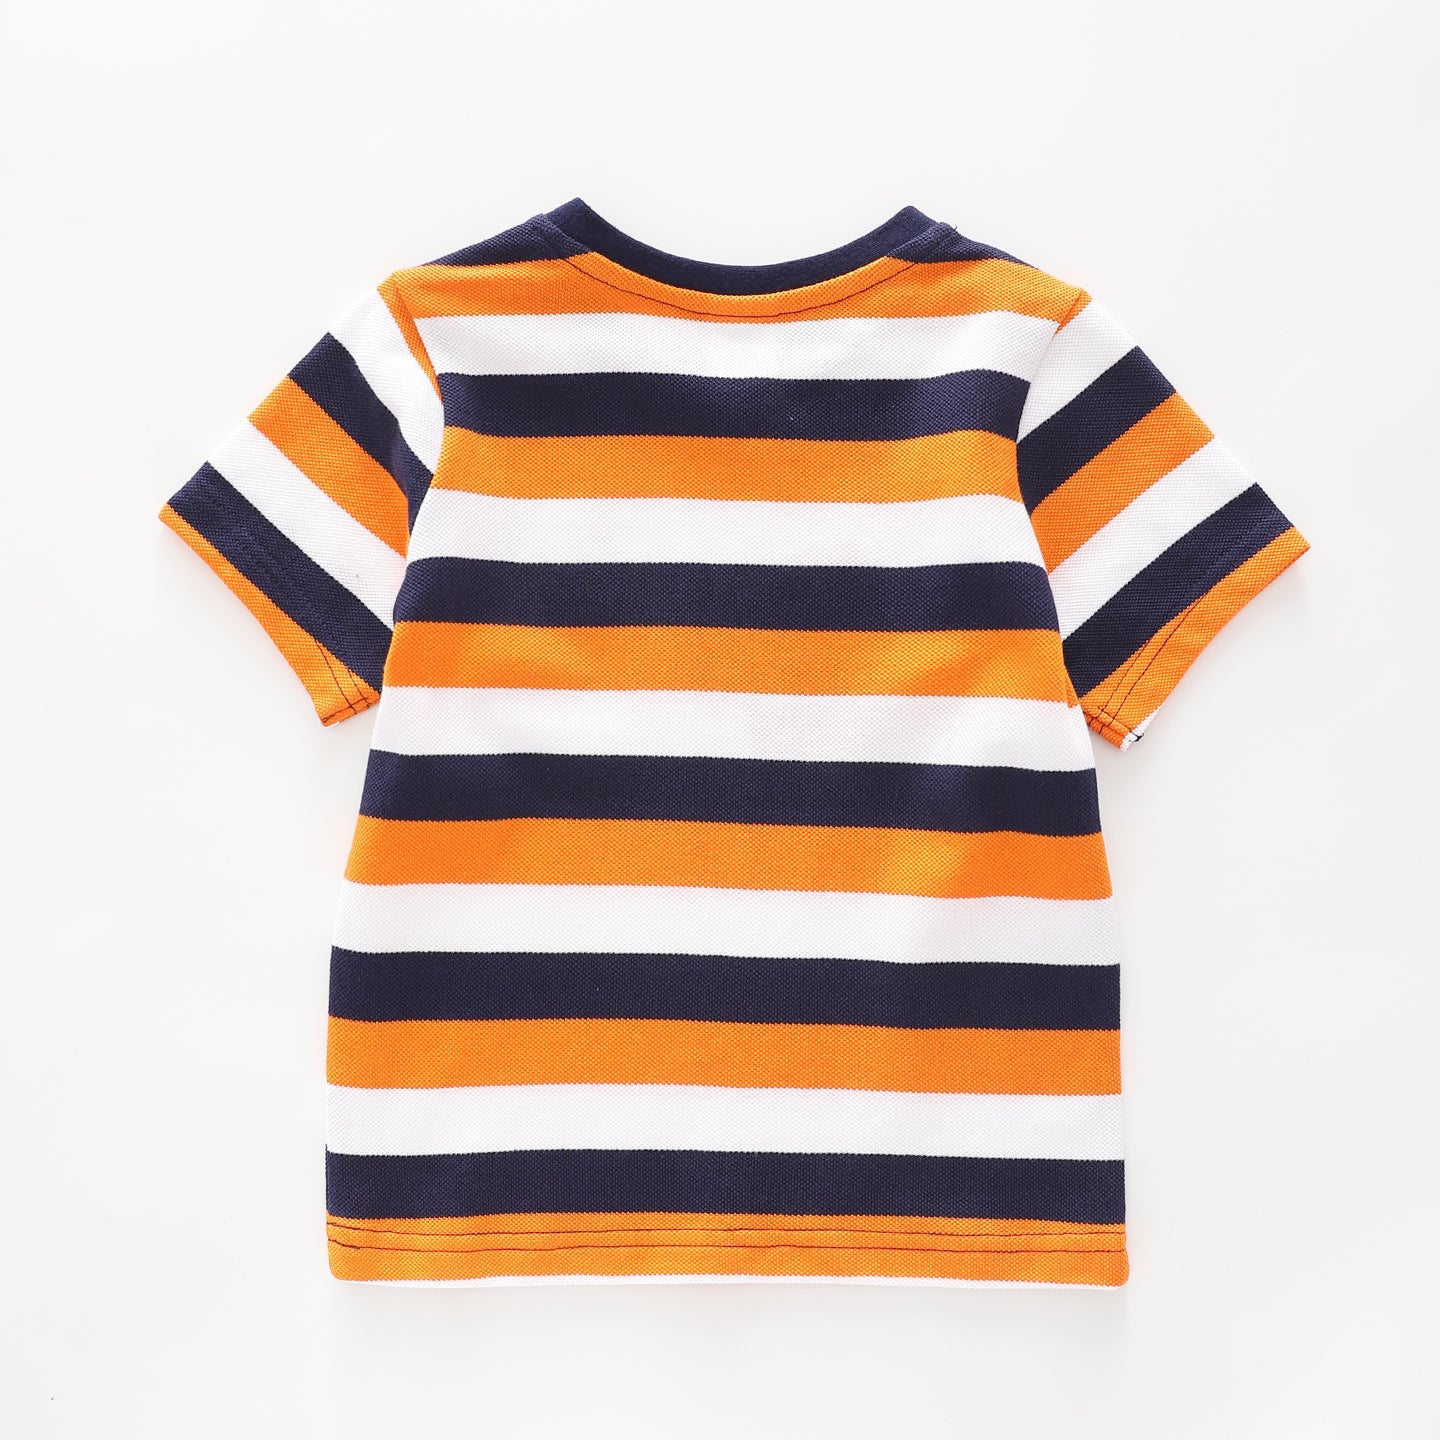 Infant and Toddler Boys Little Tiger Tee